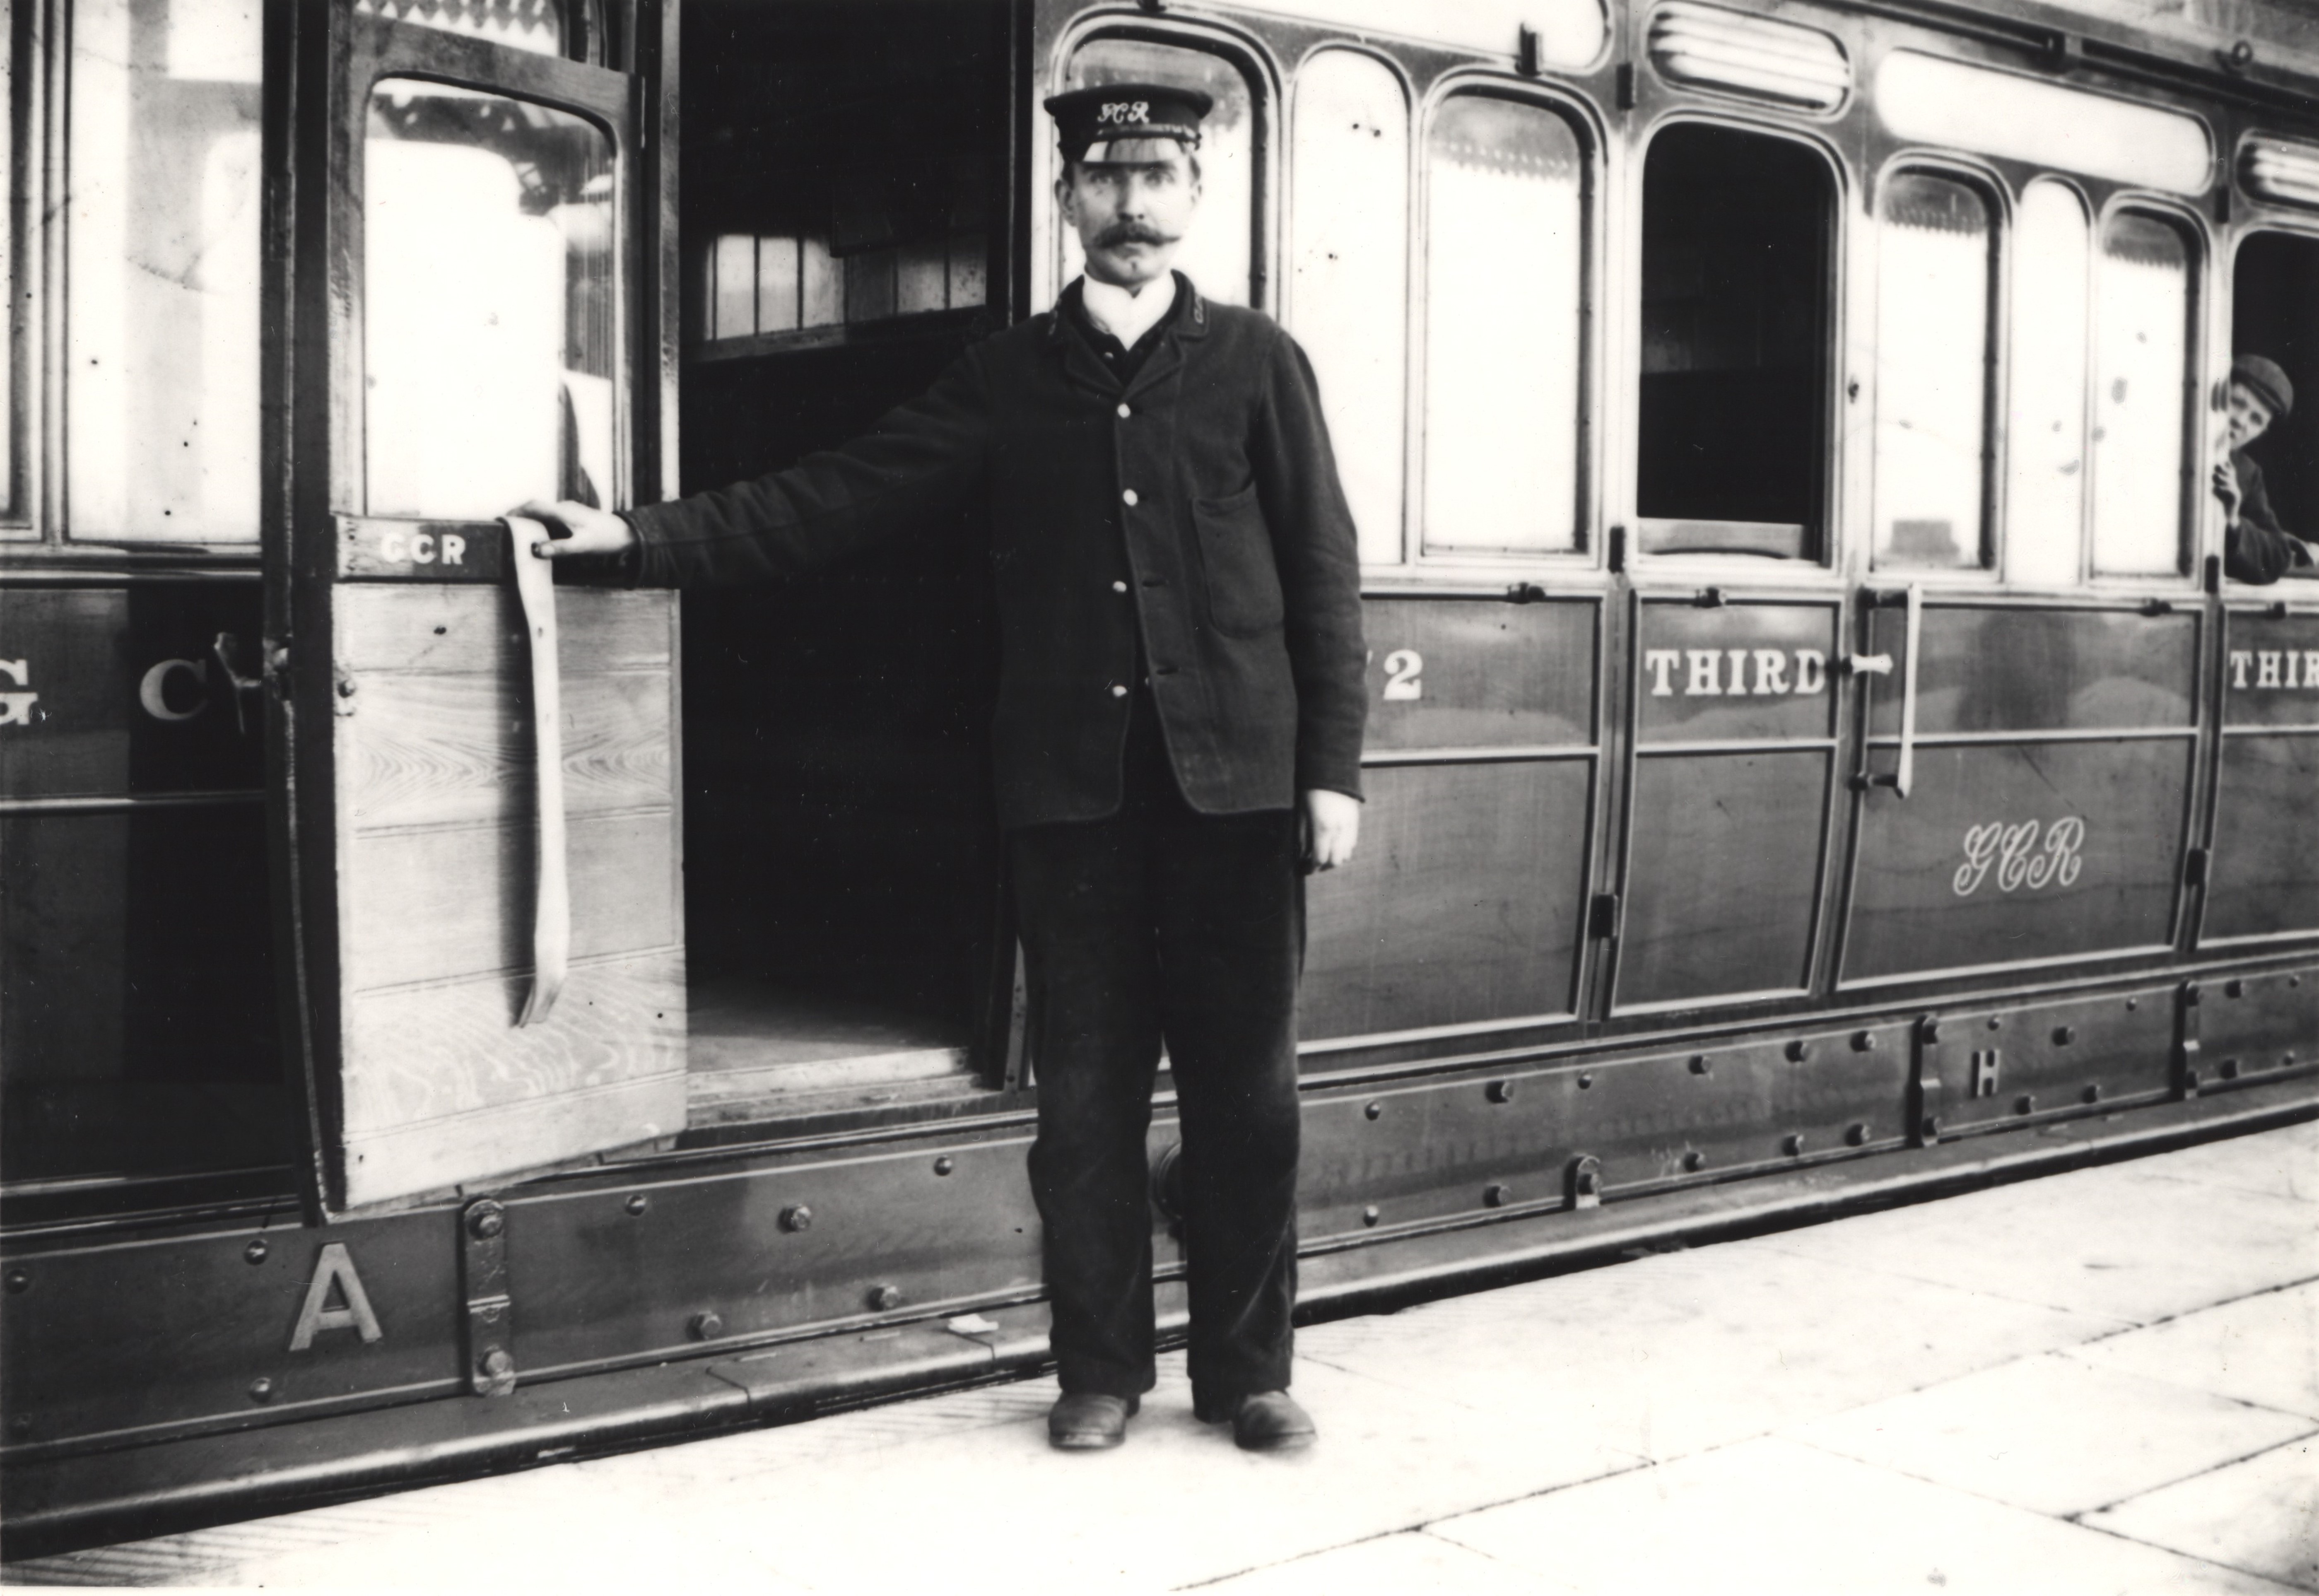 A porter poses for the camera beside a third class carriage at the Station, 1900 - Leicester & Leicestershire Record Office